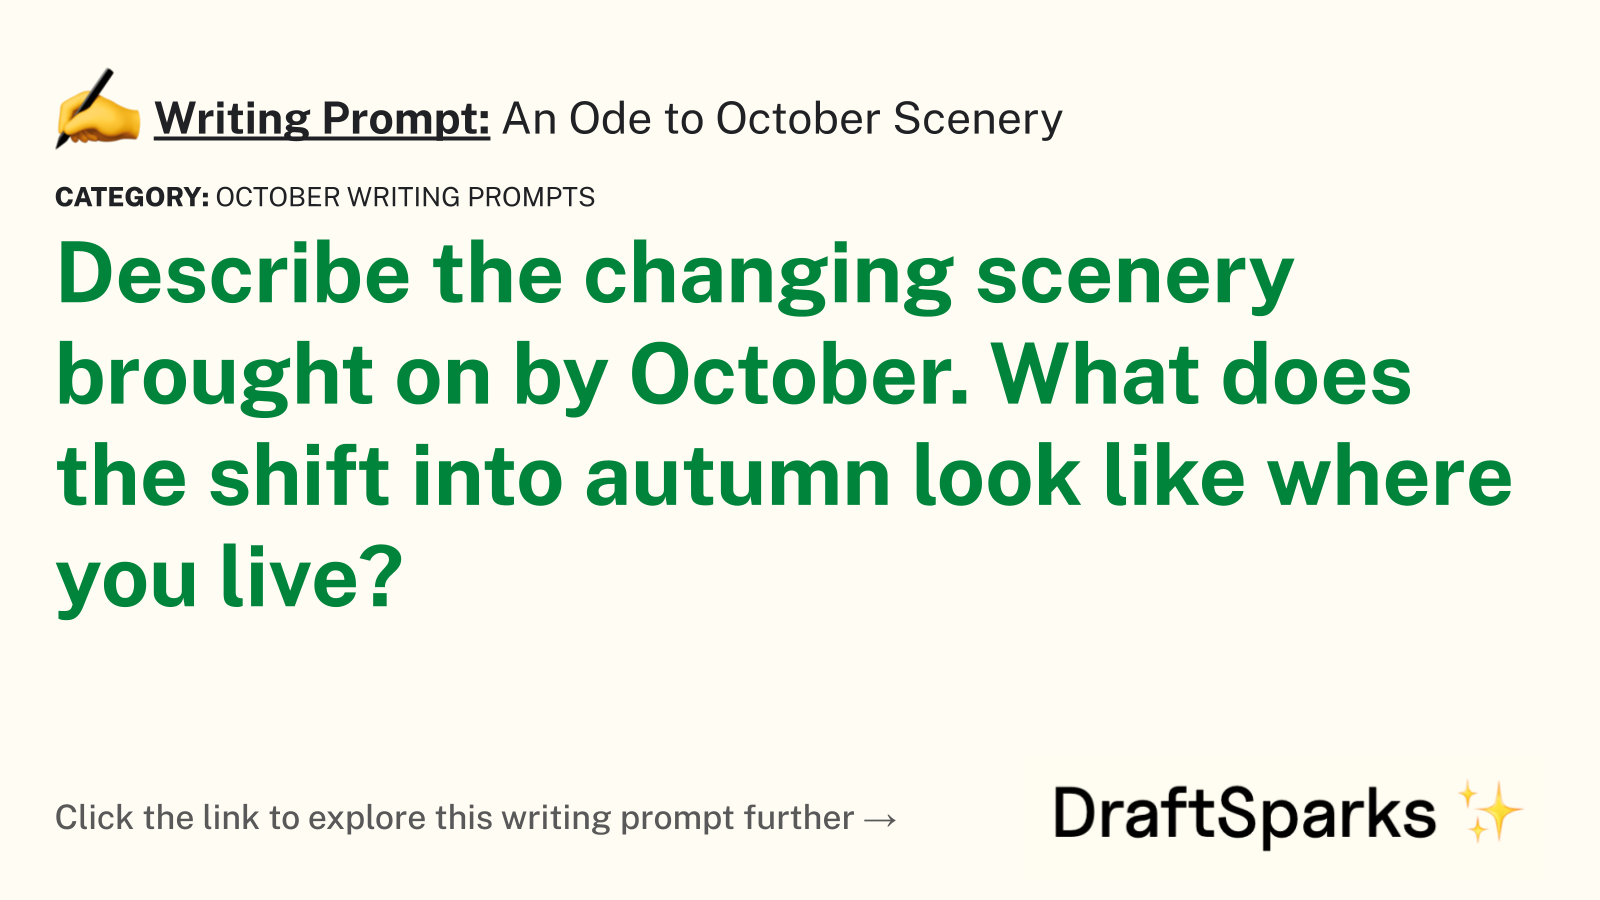 An Ode to October Scenery